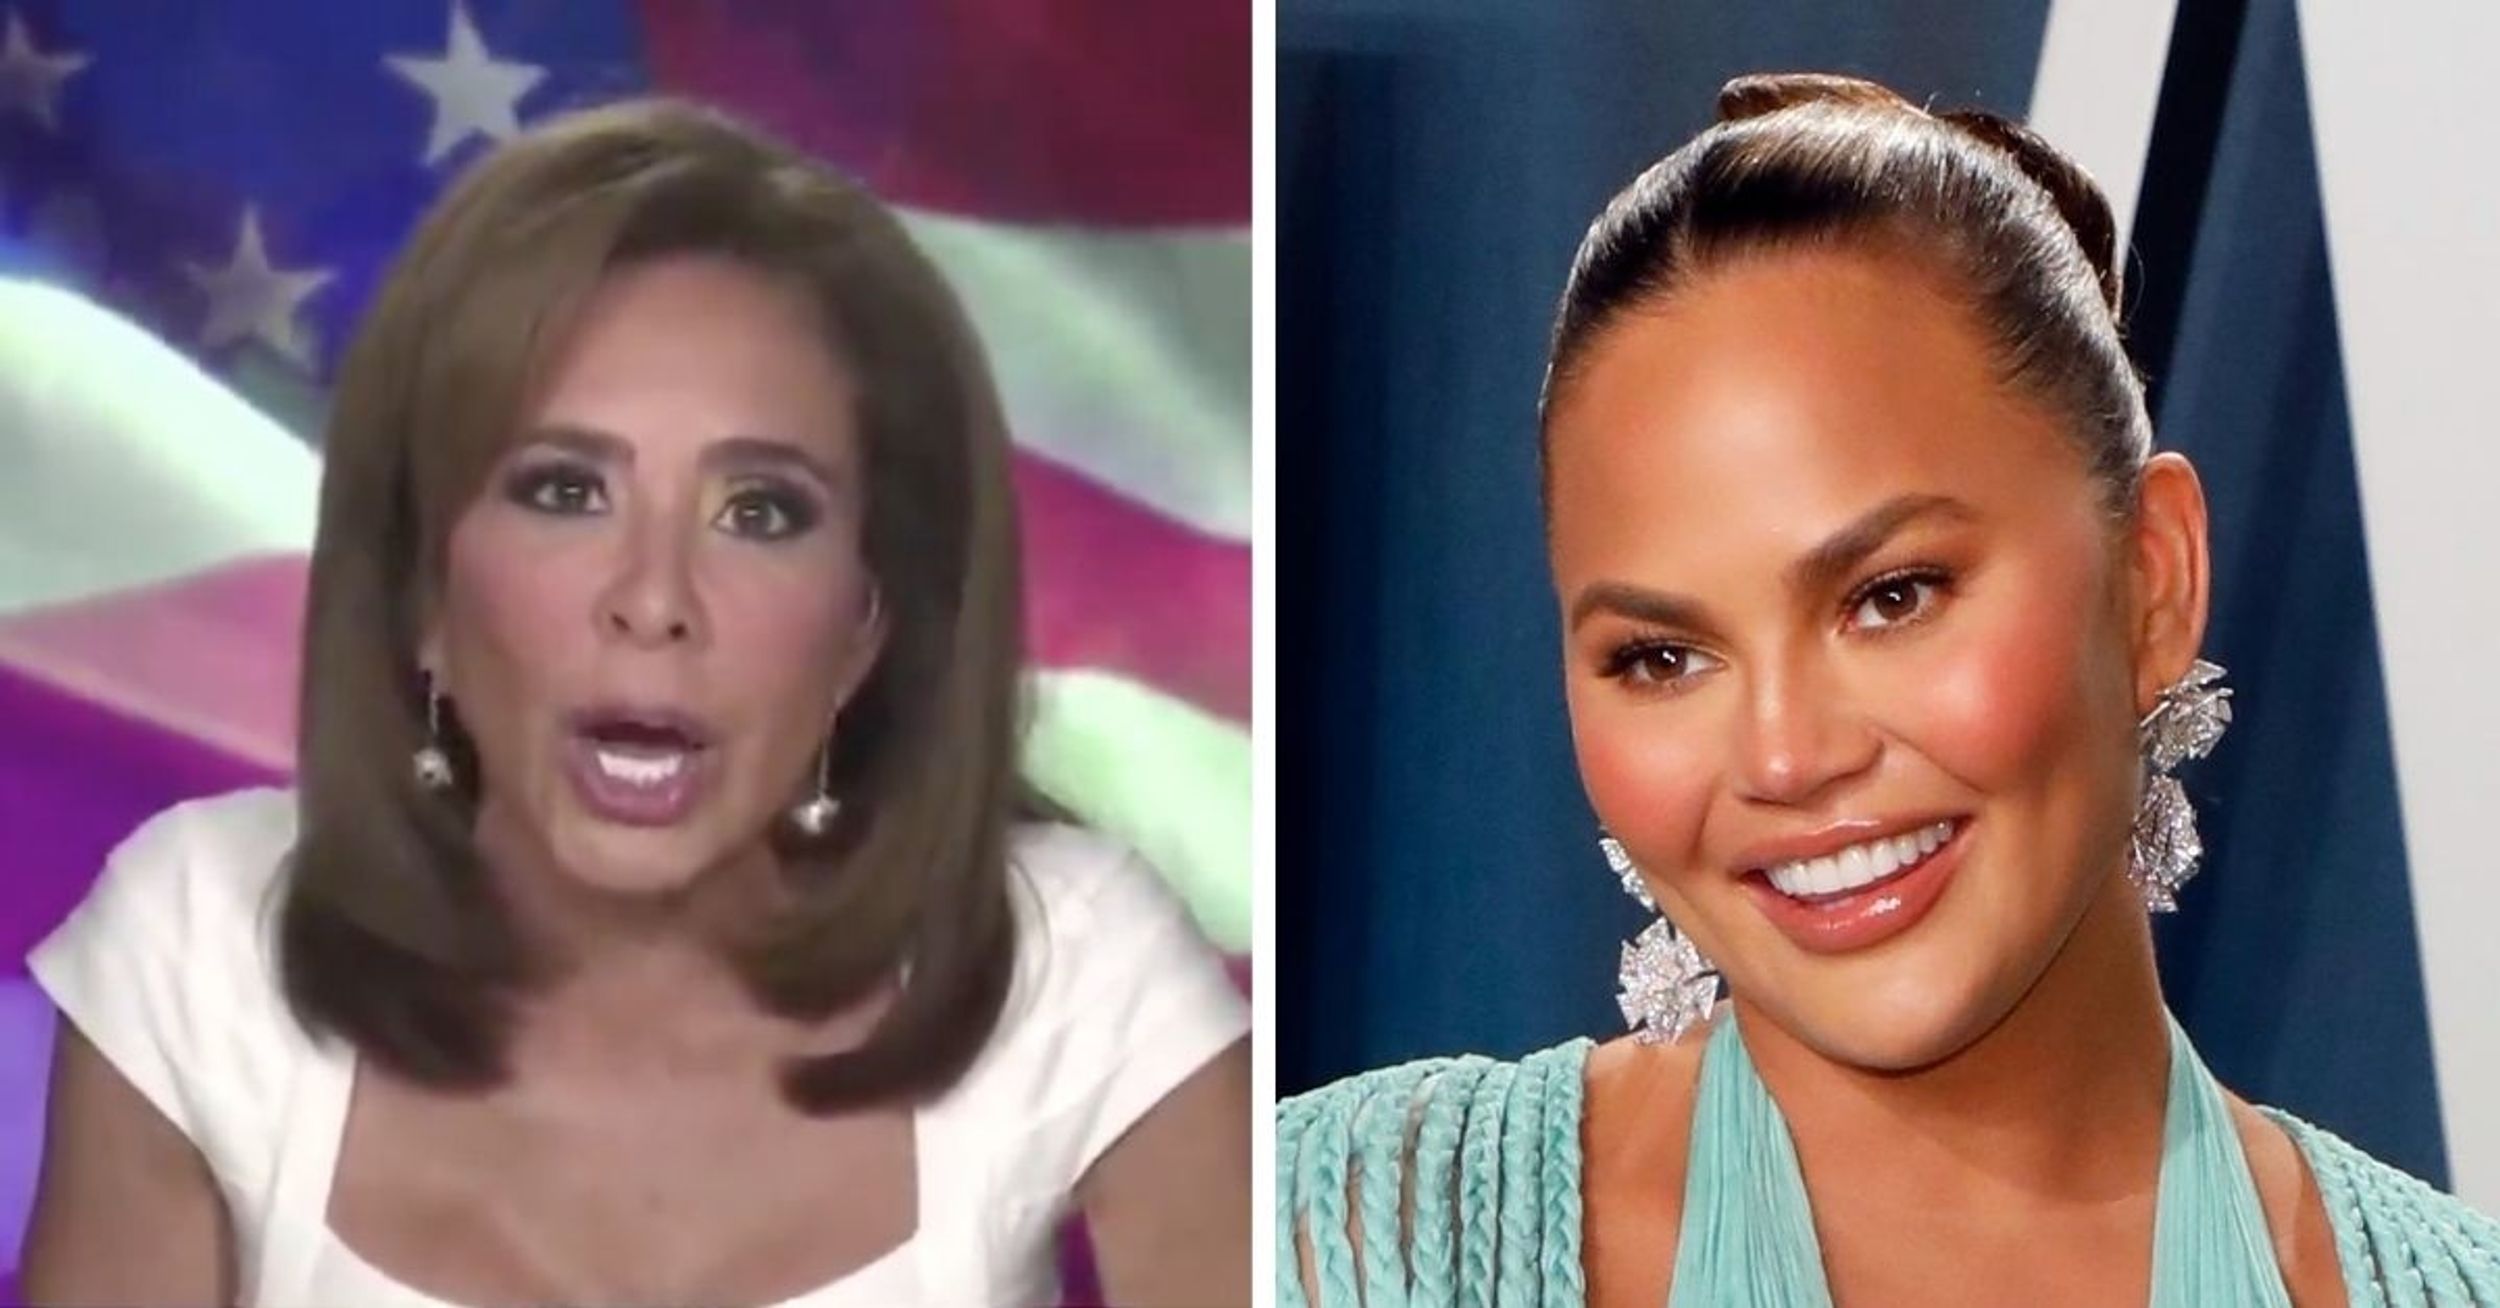 Jeanine Pirro's Rant That Trump 'Made His Own Money' Just Got Epically Trolled By Chrissy Teigen